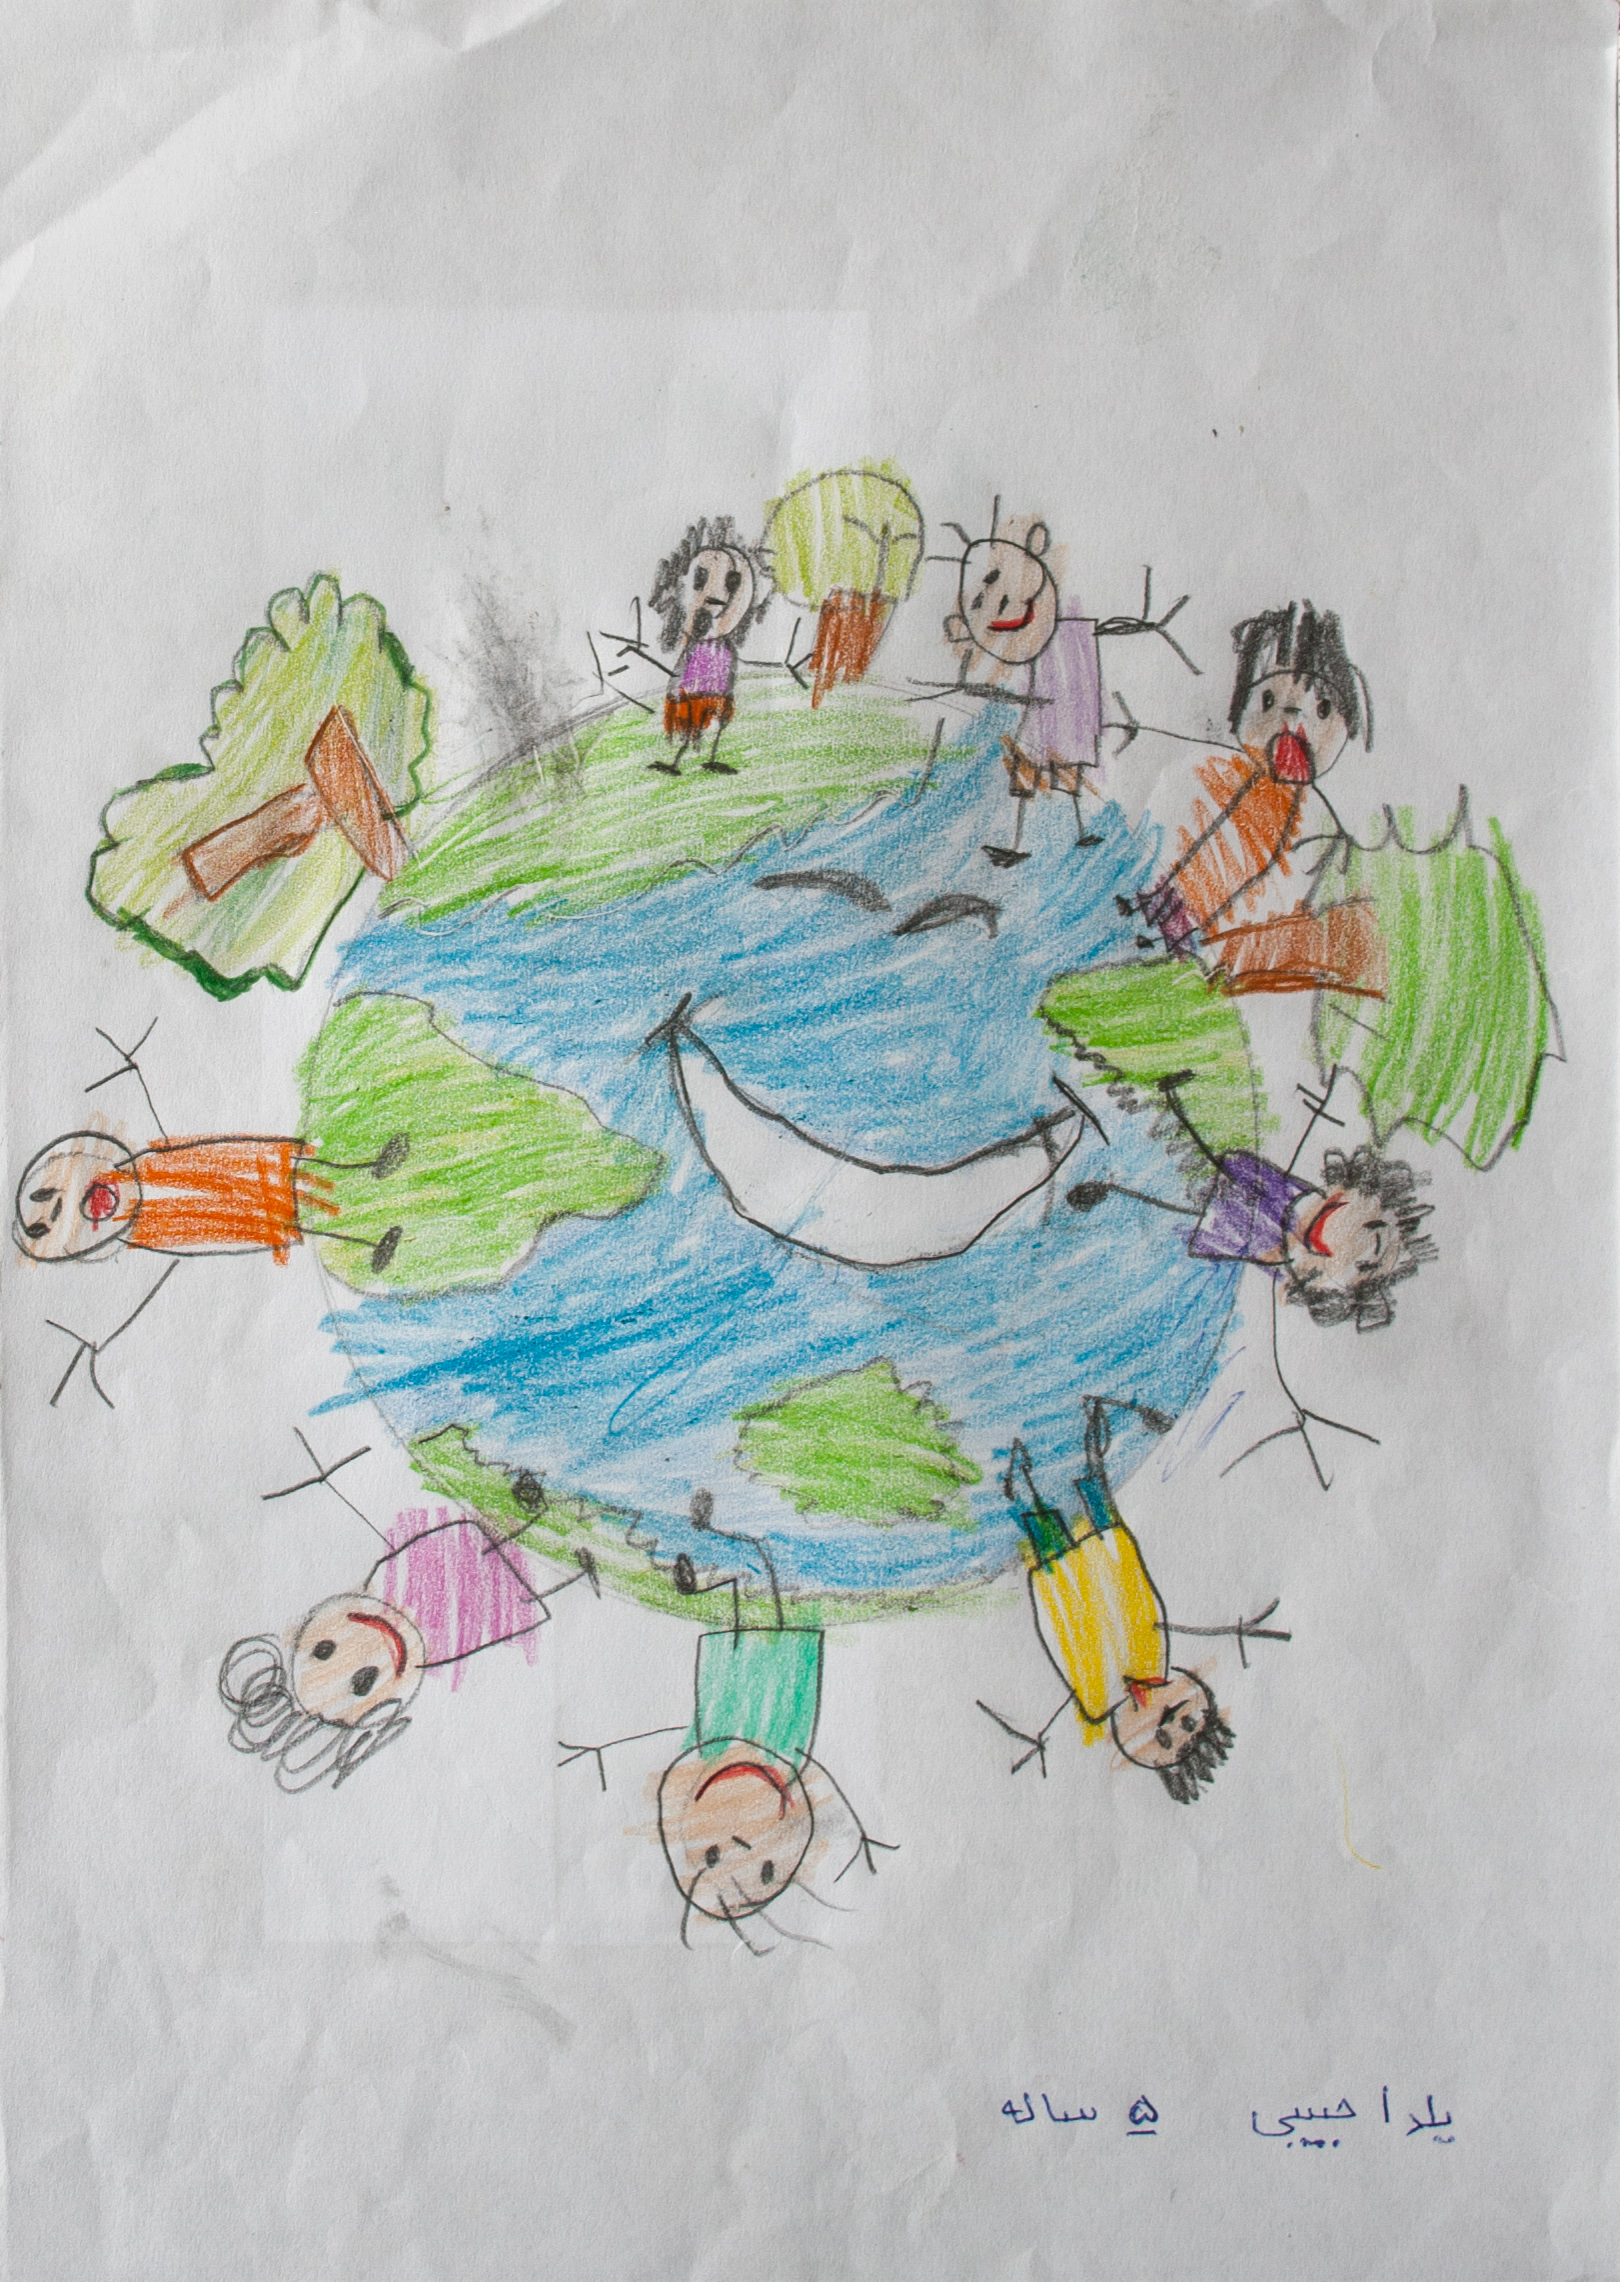 Children's map of the world